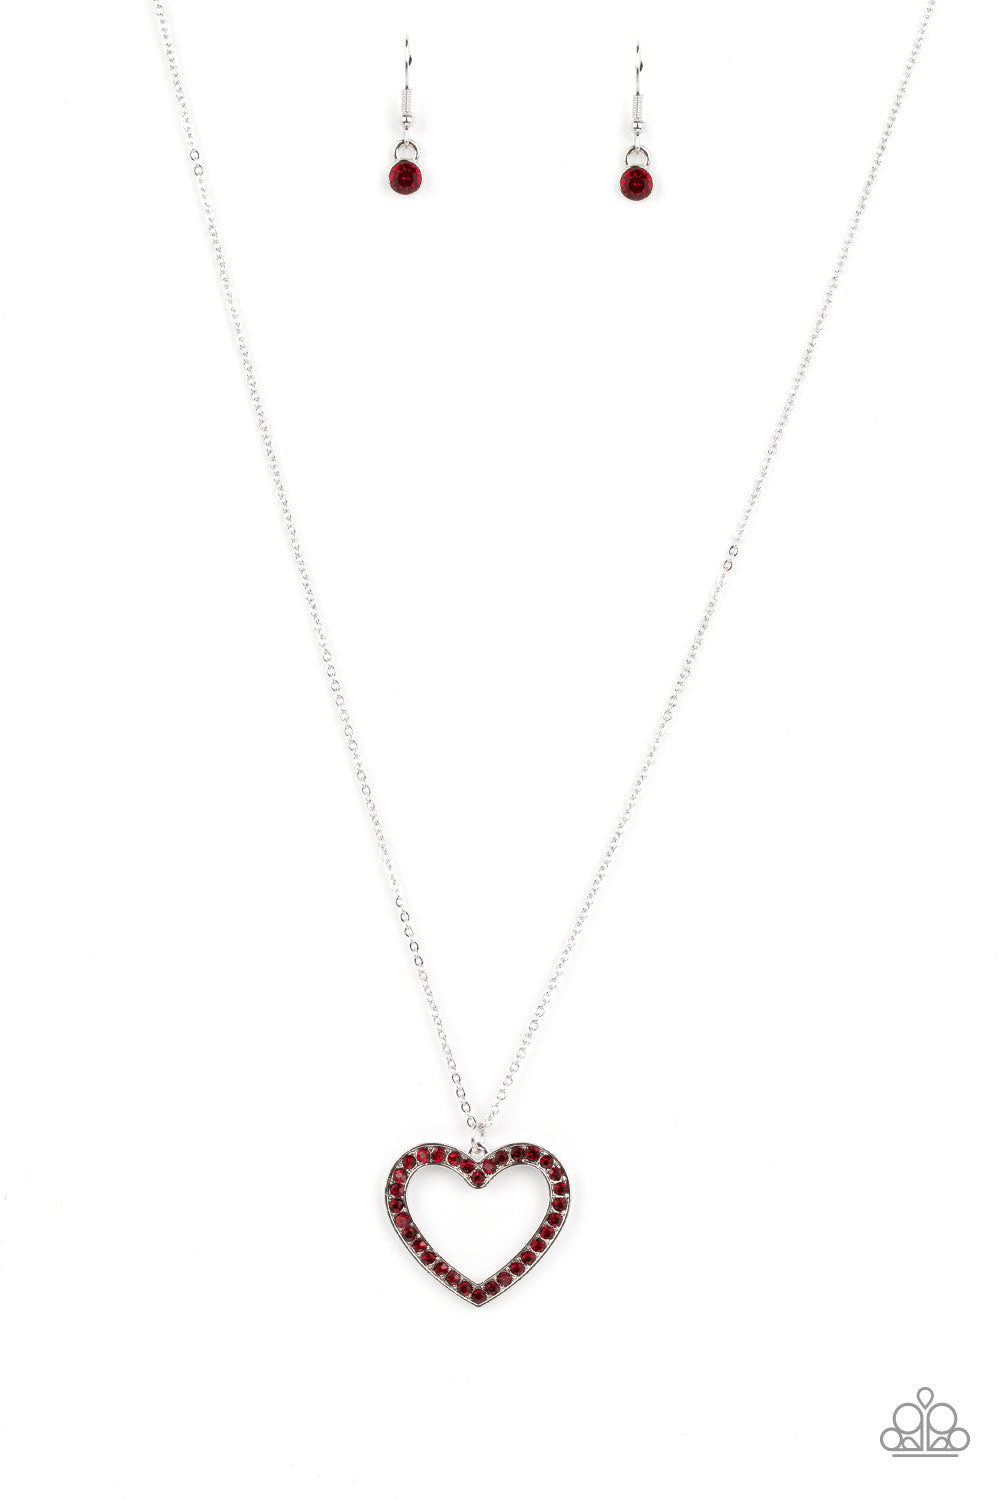 Paparazzi Necklaces - Dainty Darling - Red